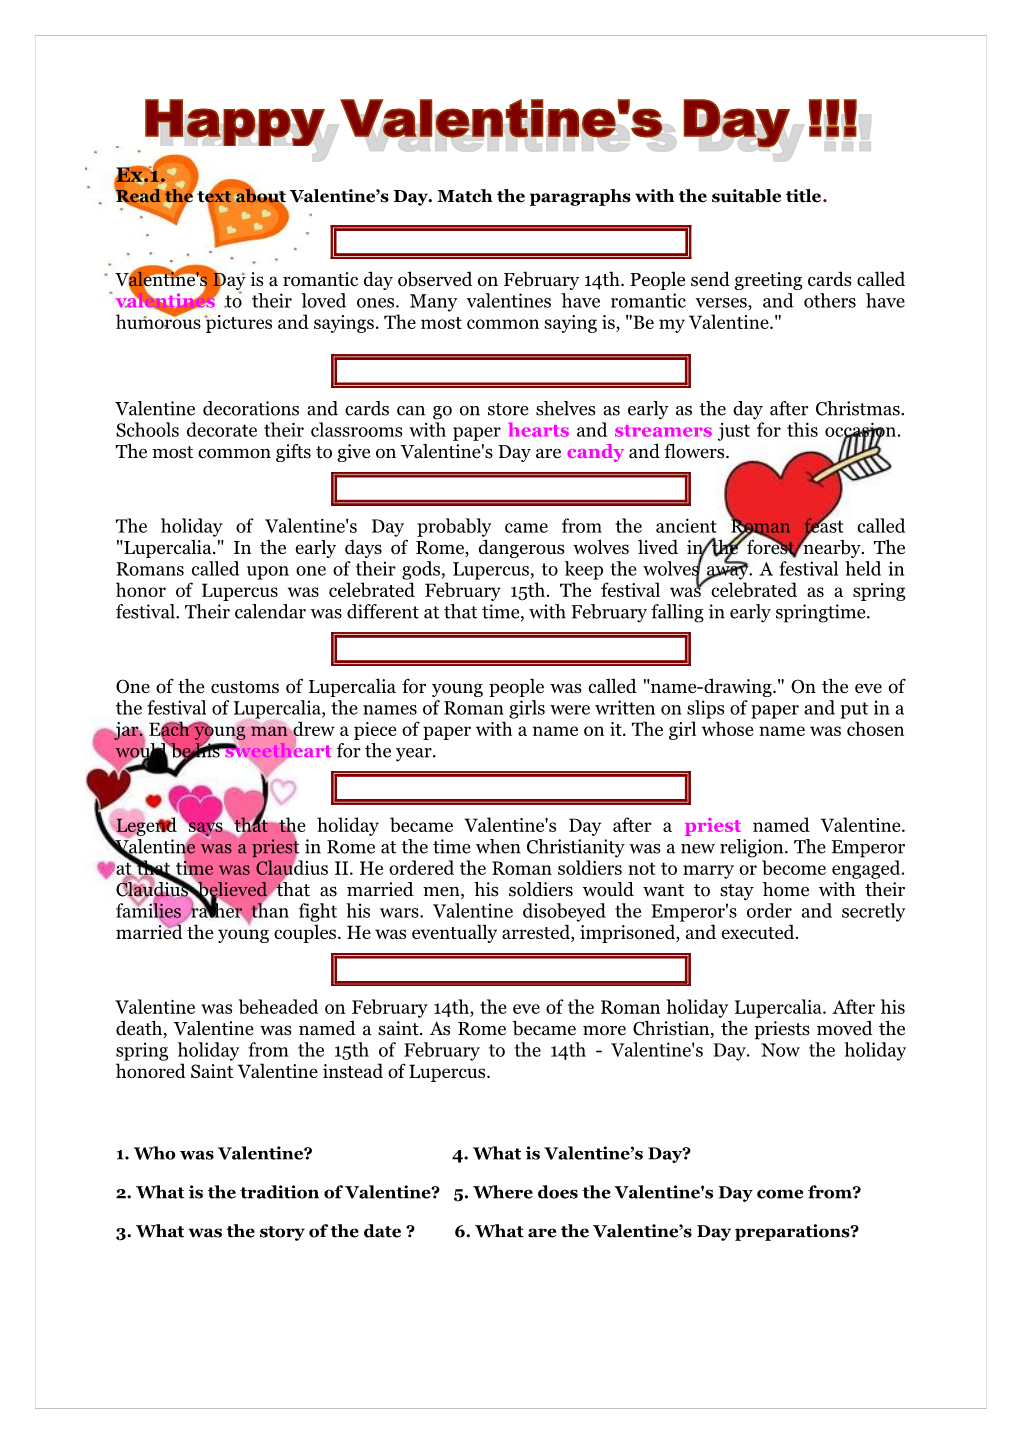 Read the Text About Valentine S Day. Match the Paragraphs with the Suitable Title